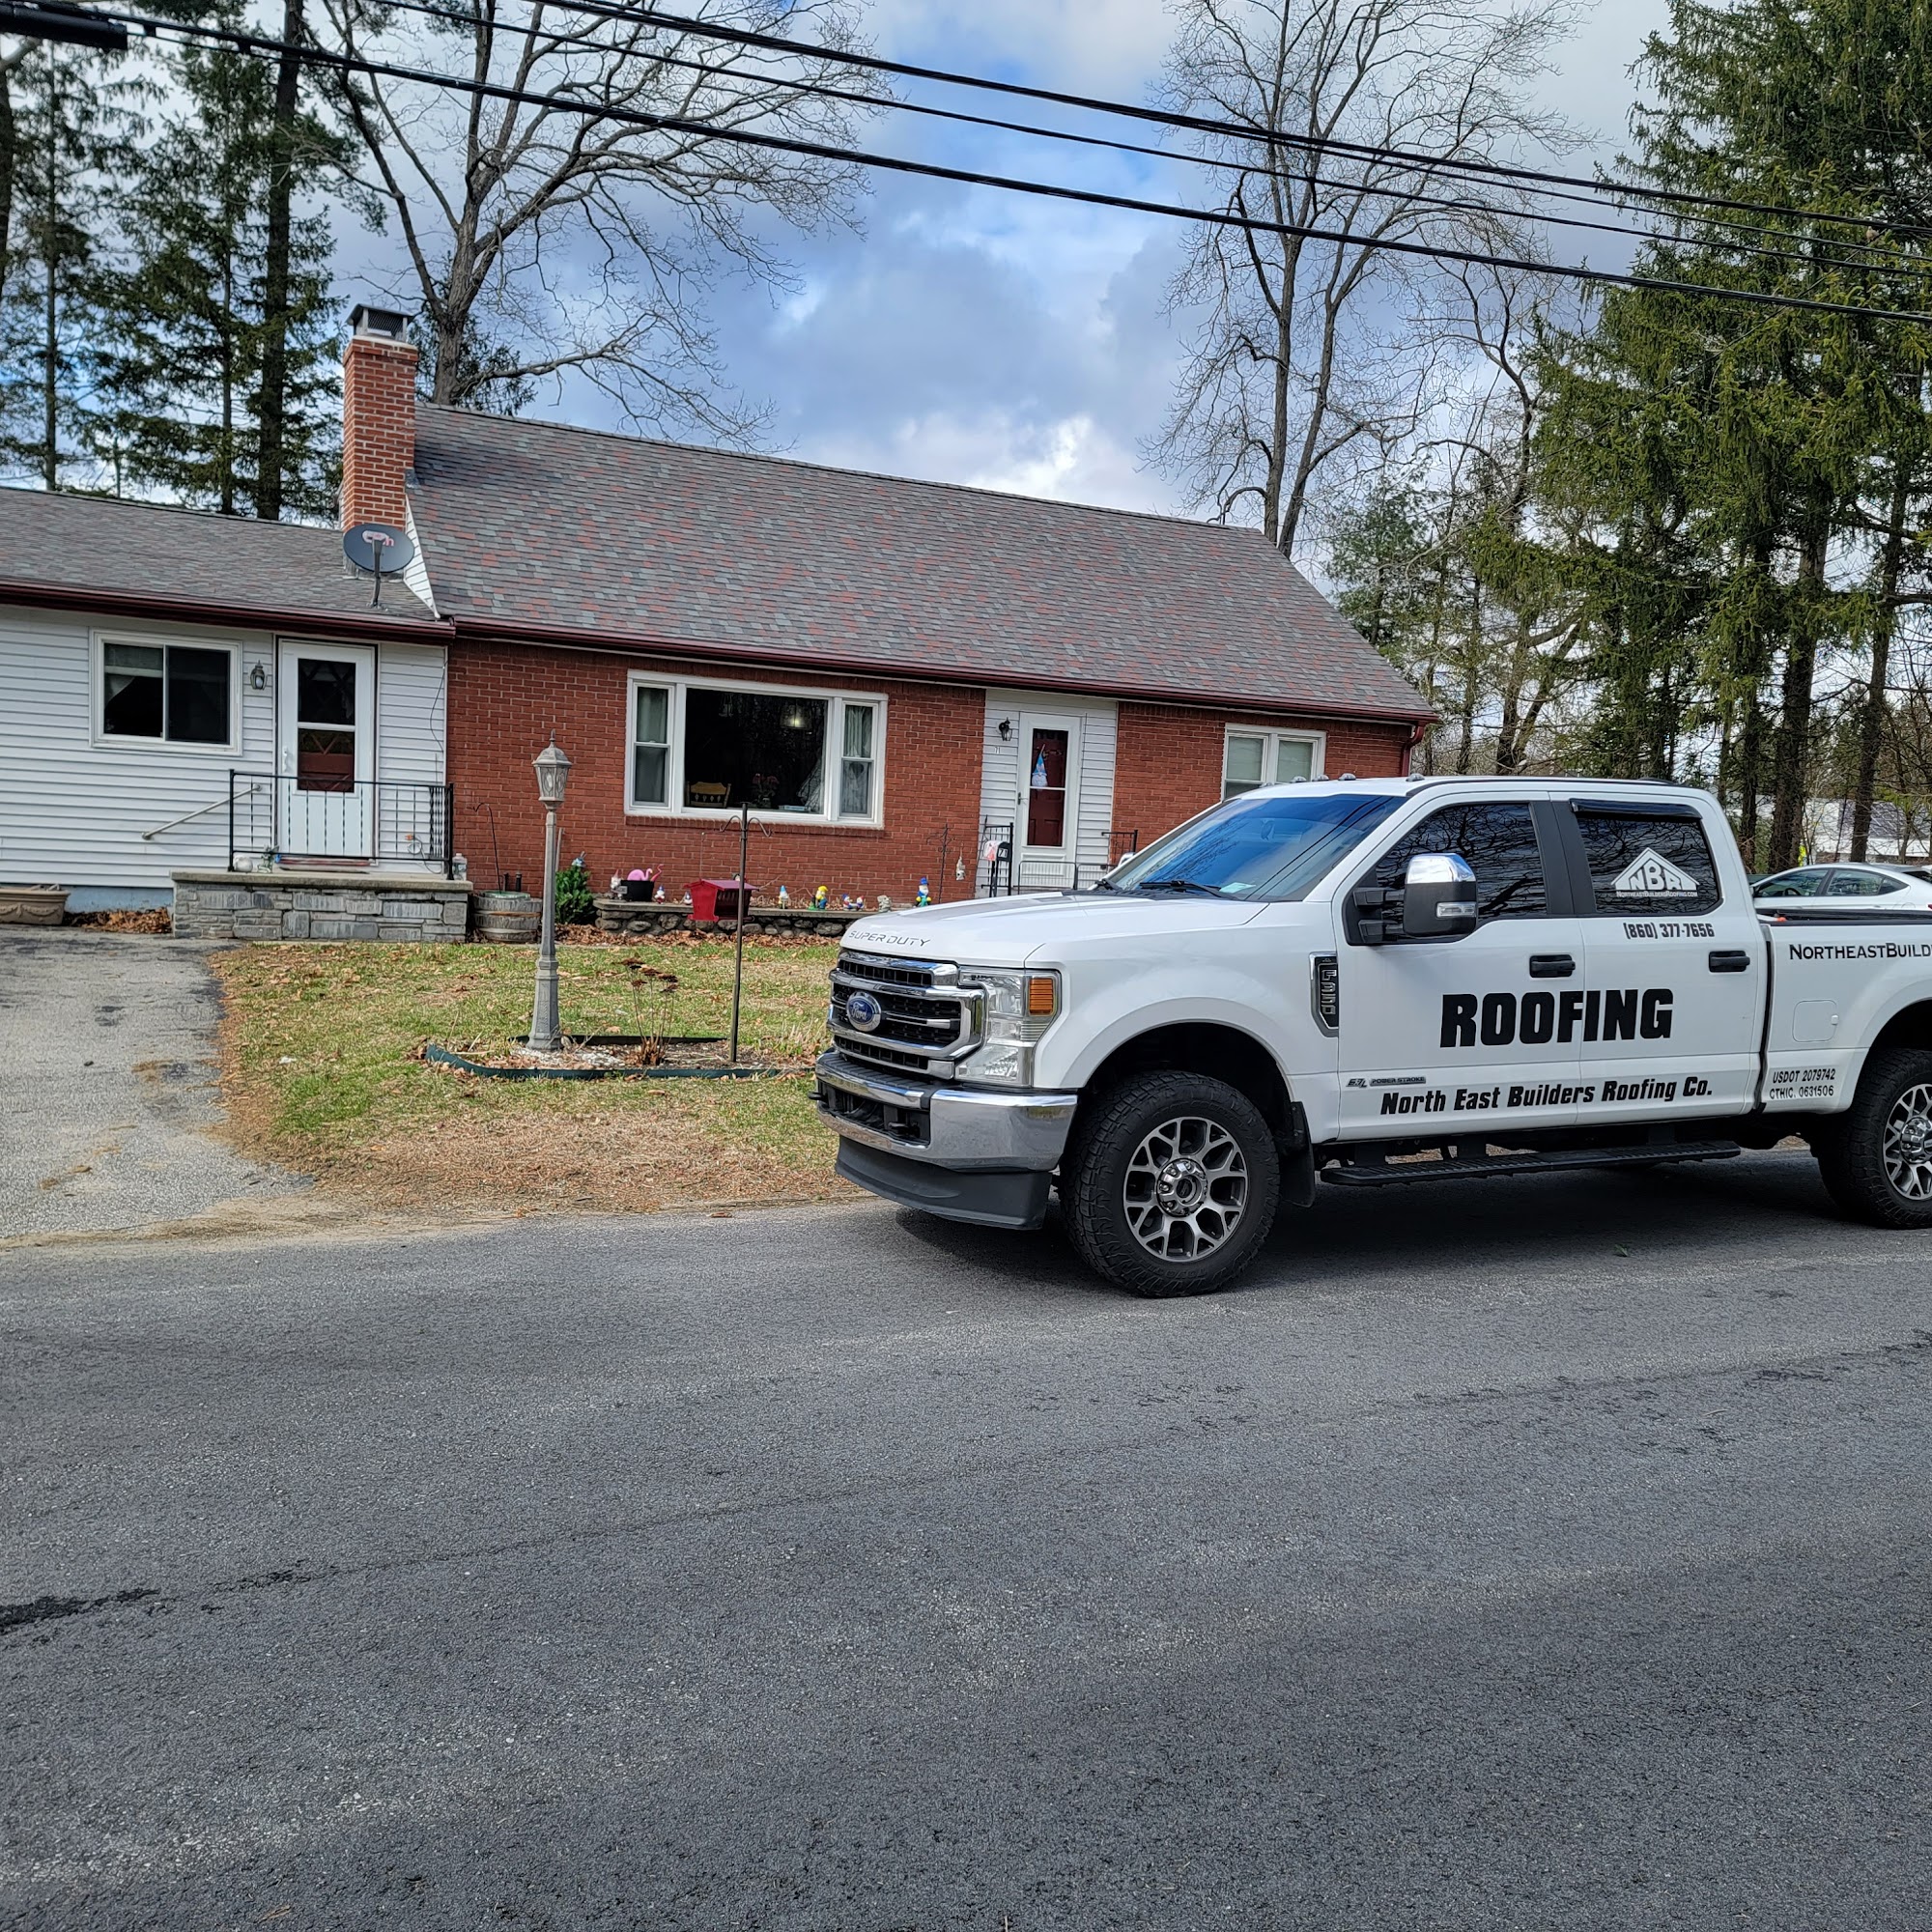 Northeast Builders Roofing Co 105 Eastford Rd, Eastford Connecticut 06242